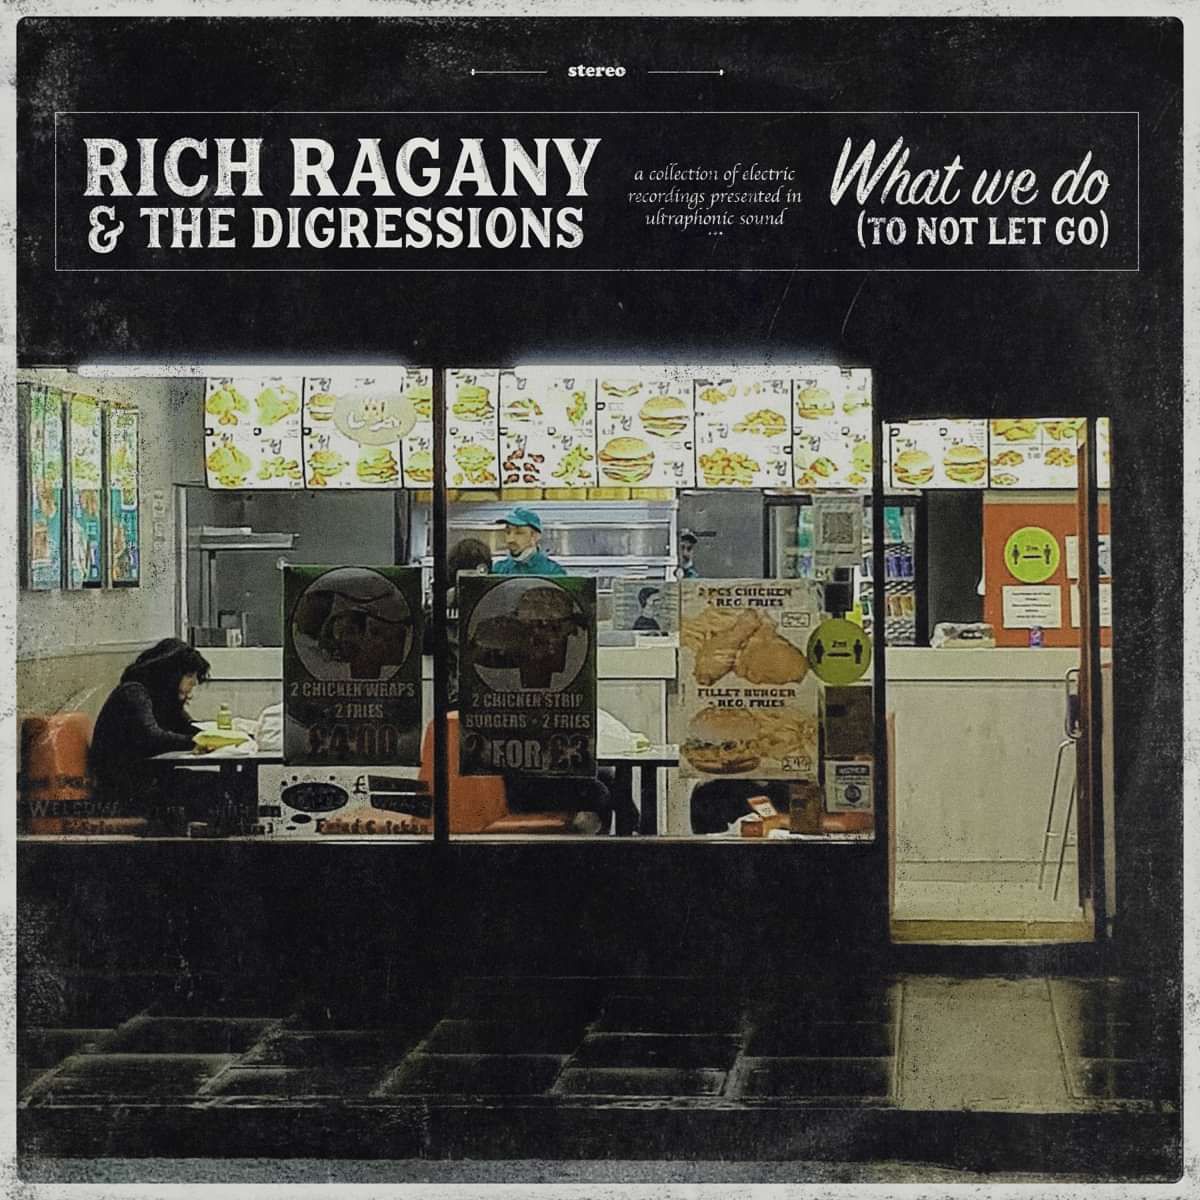 Rich Ragany & The Digressions - What We Do (To Not Let Go) - Digital Download Album - Barrel And Squidger Records